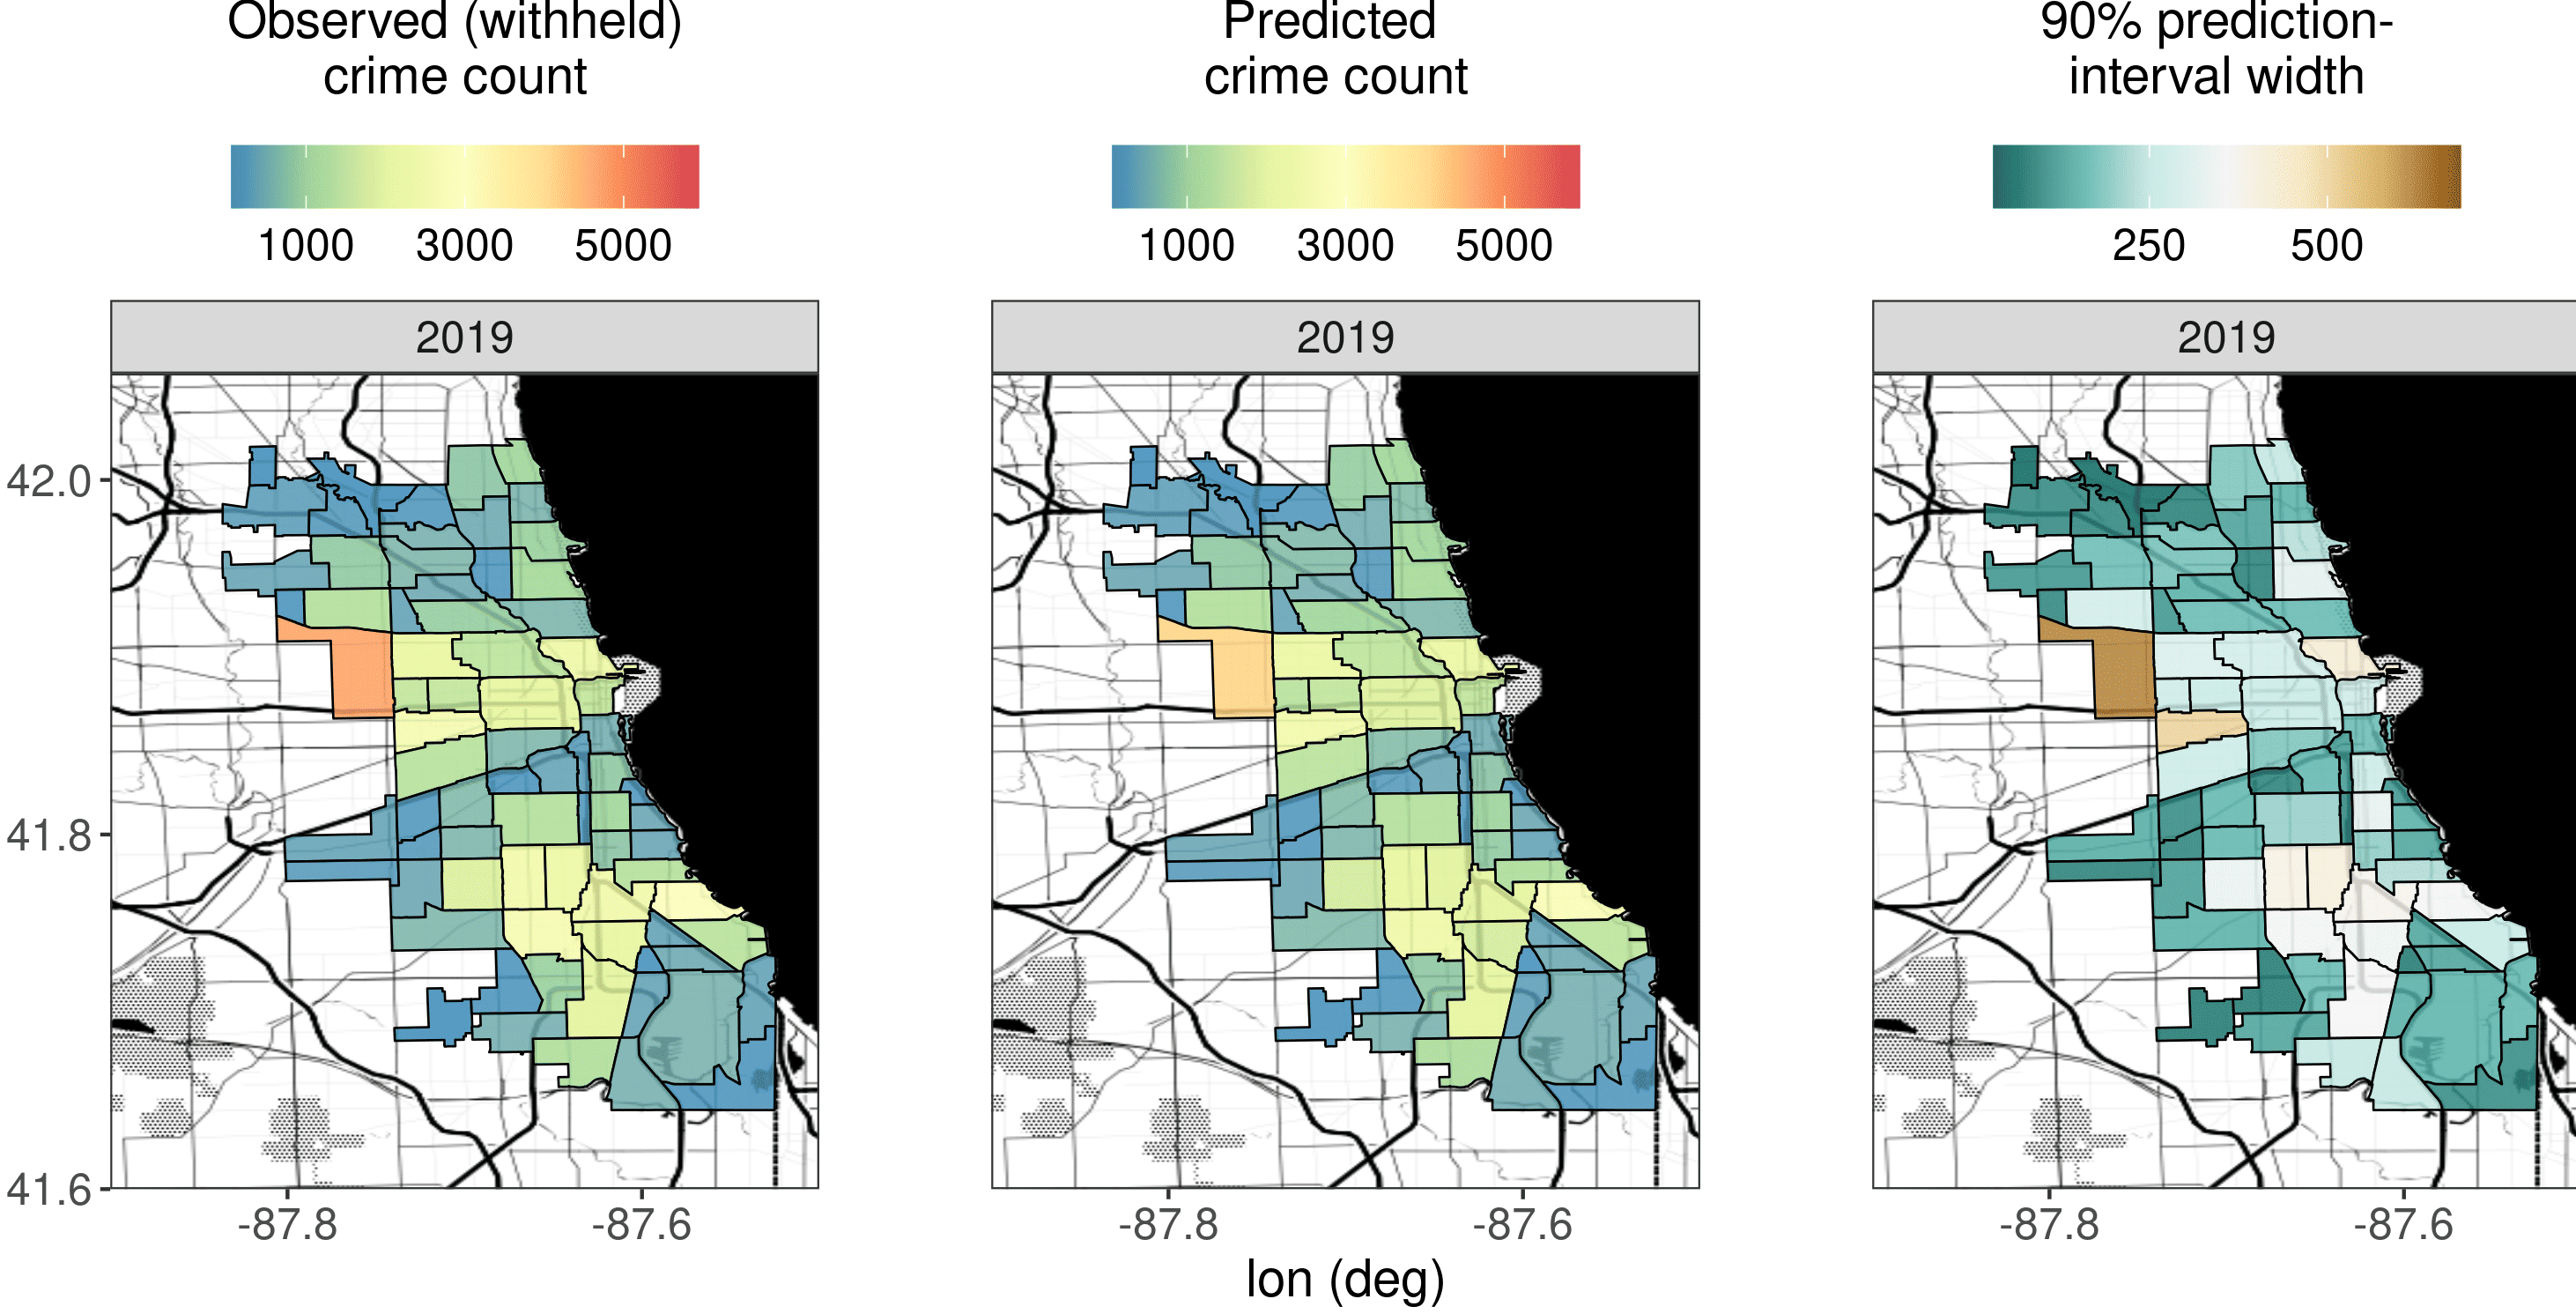 Three maps of Chicago with its community areas coloured based on the observed crime, the one-year-ahead predicted crime, and the prediction-interval width.